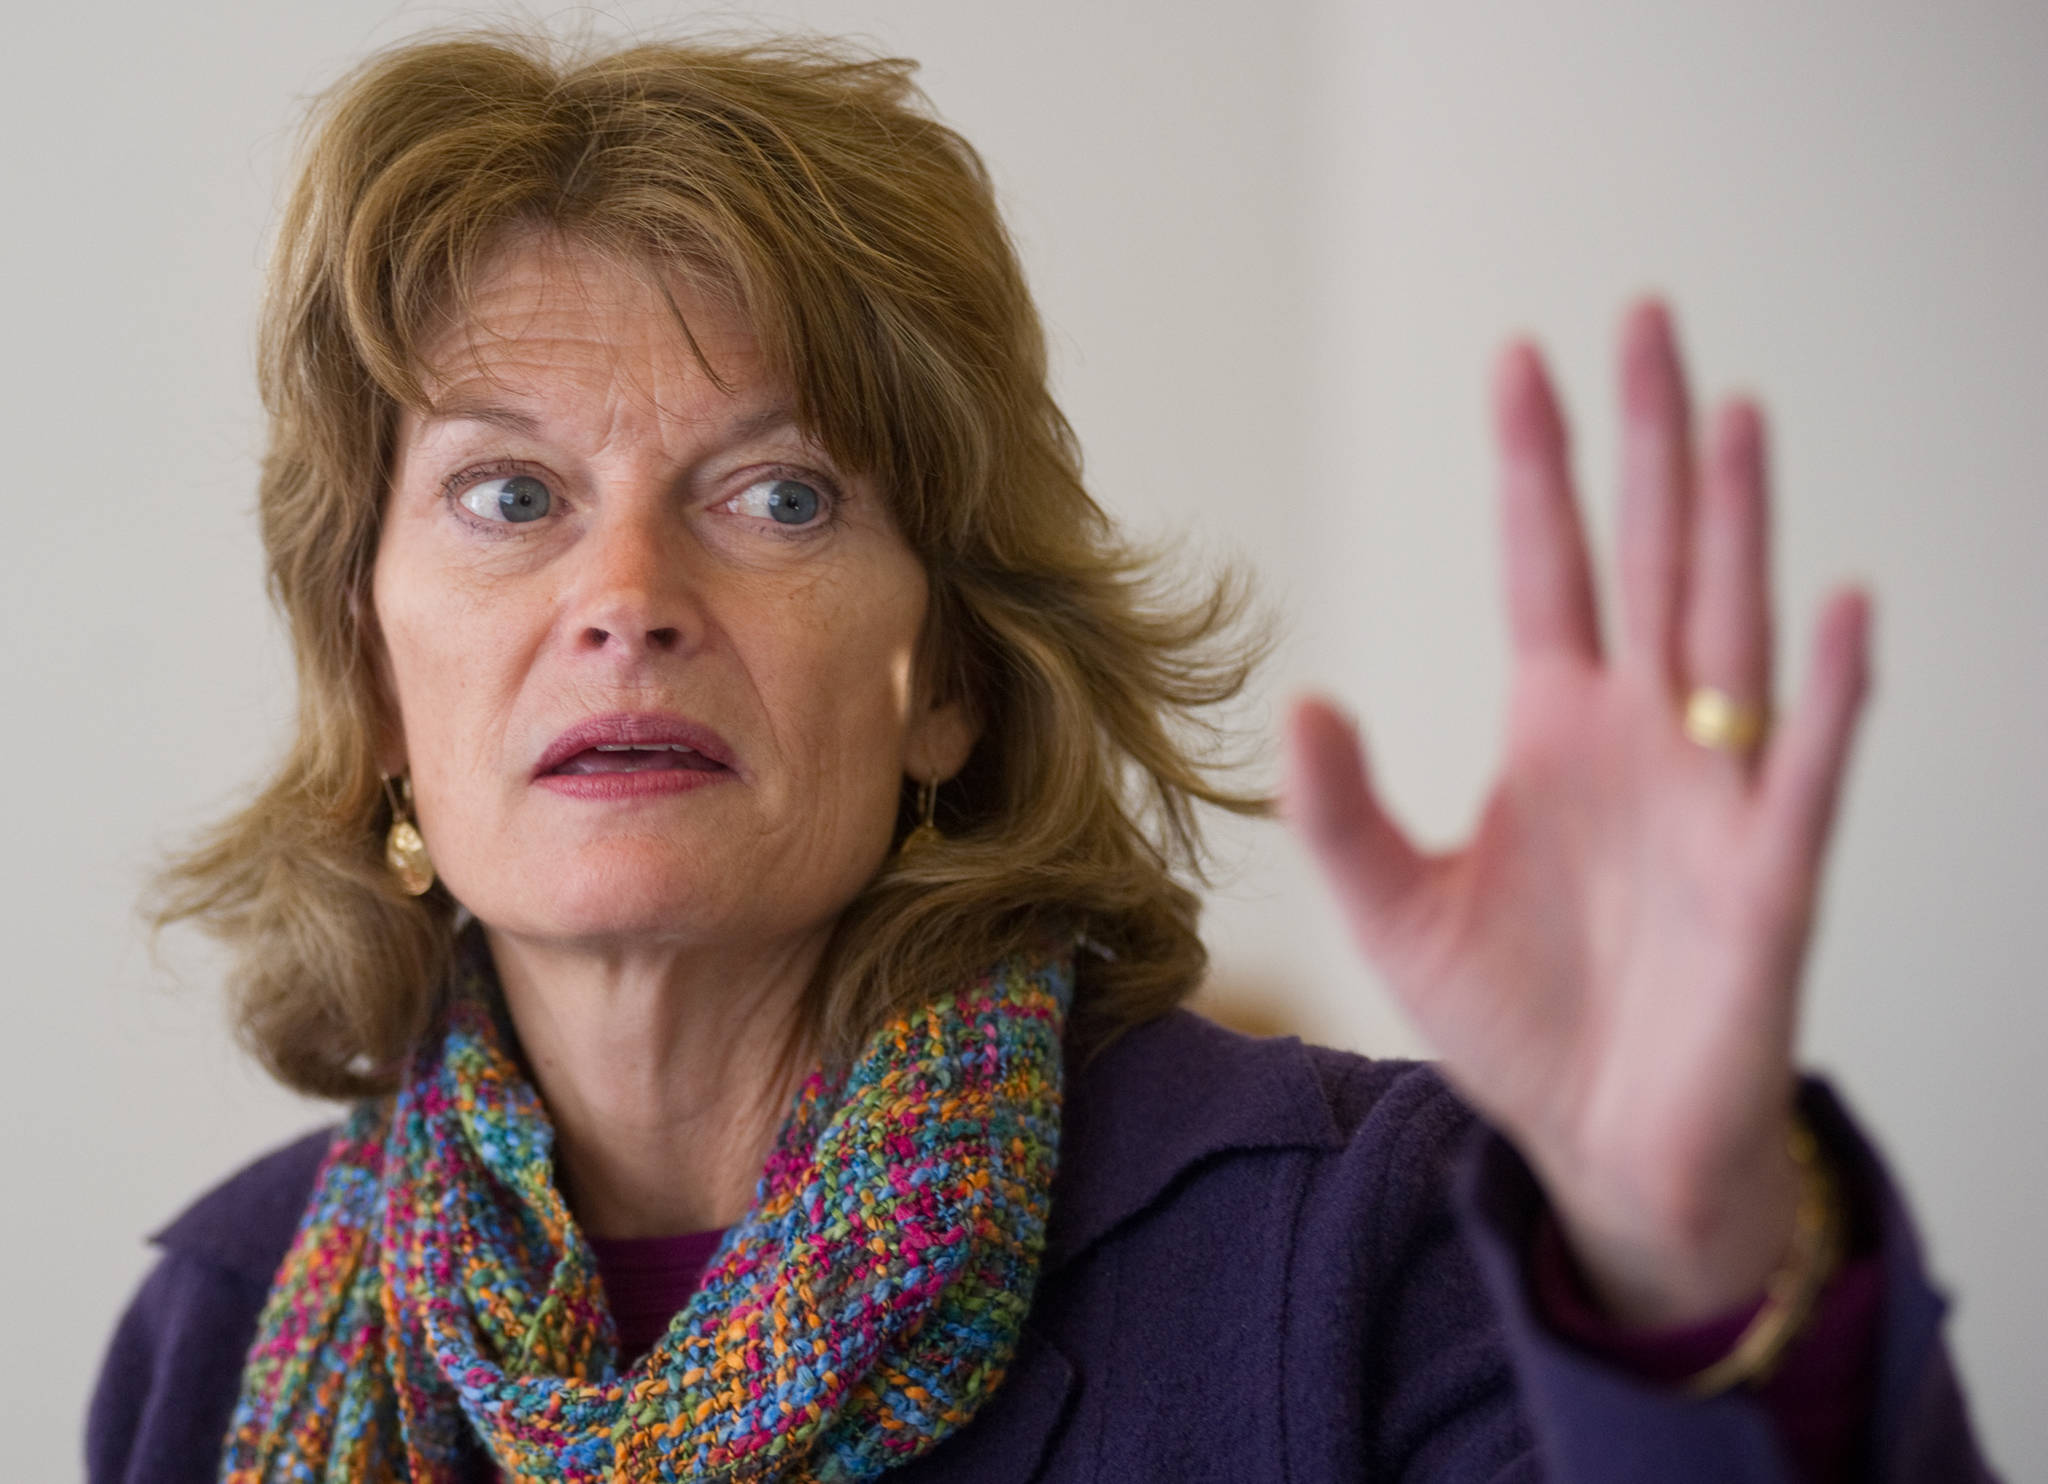 Sen. Lisa Murkowski speaks during an interview at the Baranof Hotel in this February 2014 photo. (Michael Penn | Juneau Empire File)